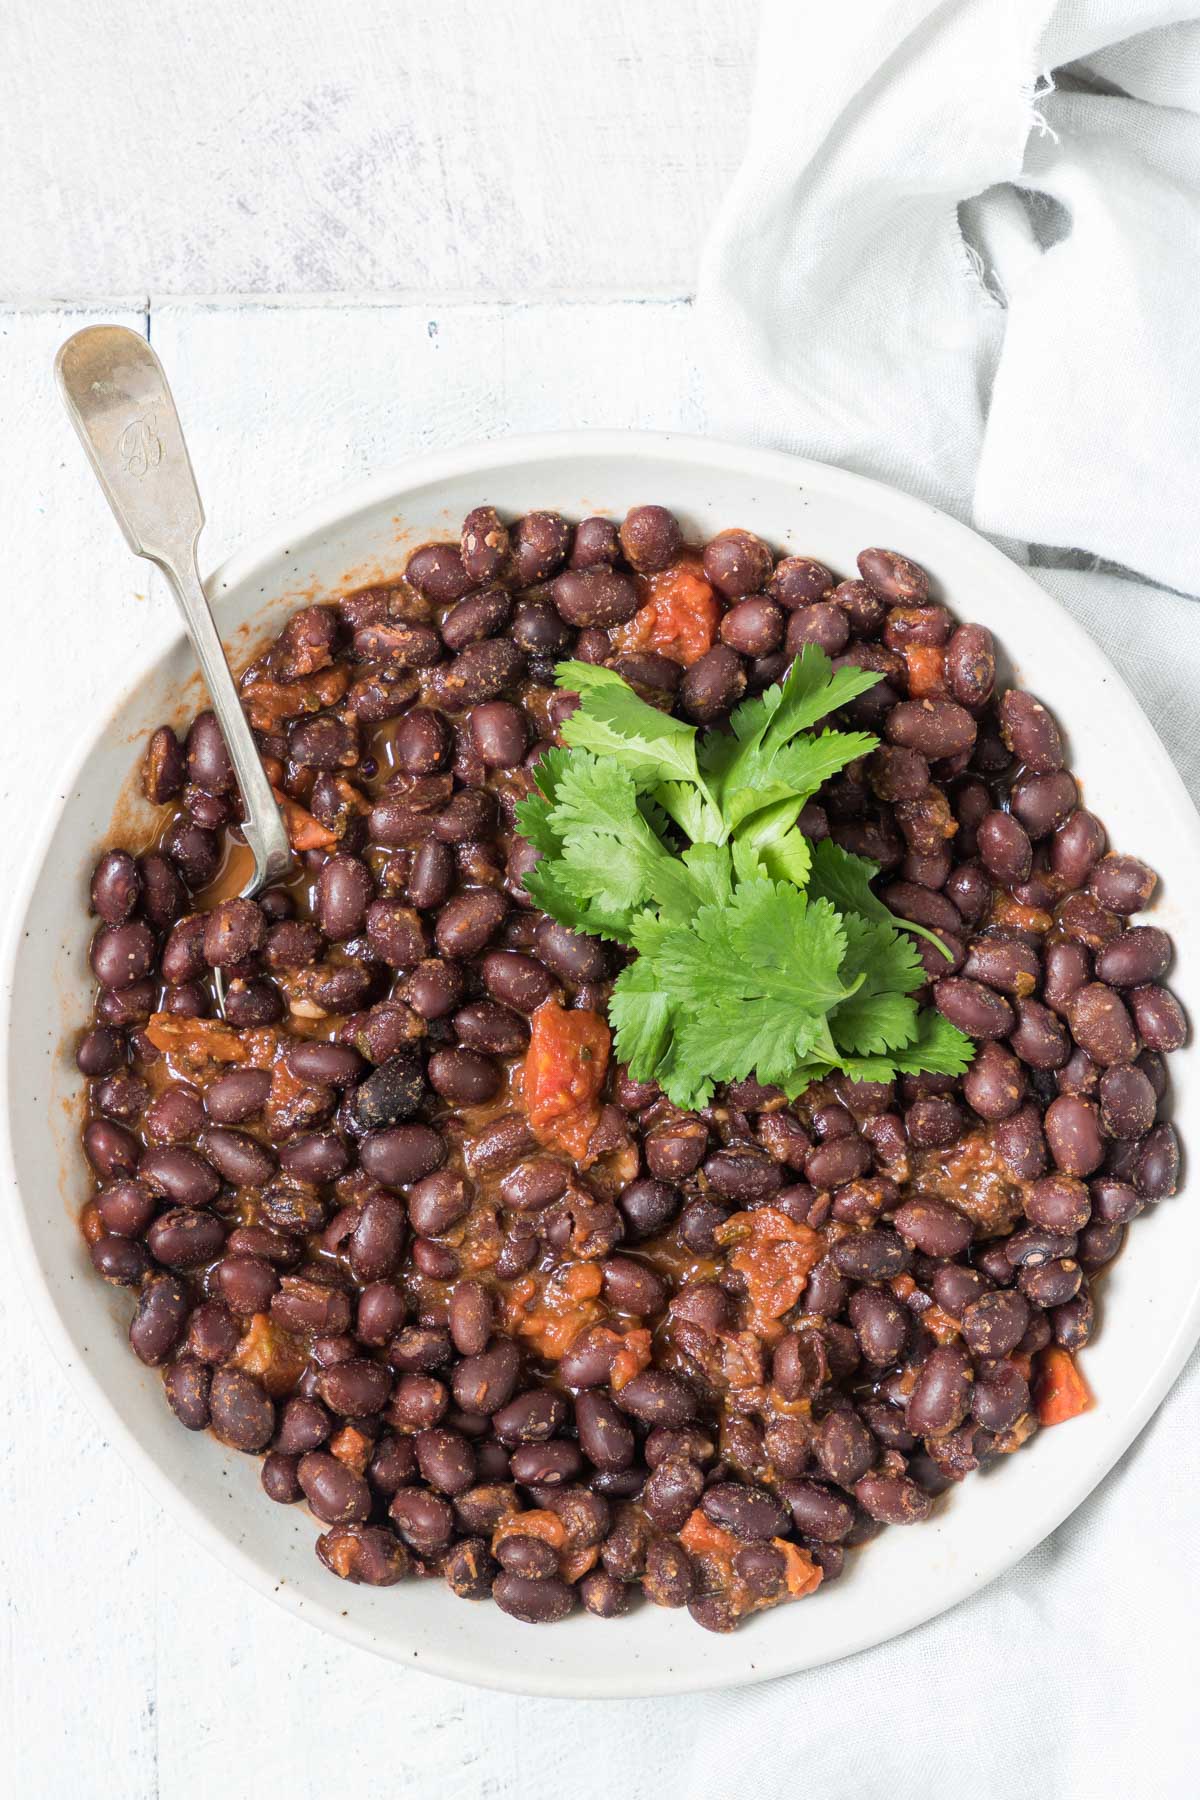 How To Cook Canned Black Beans